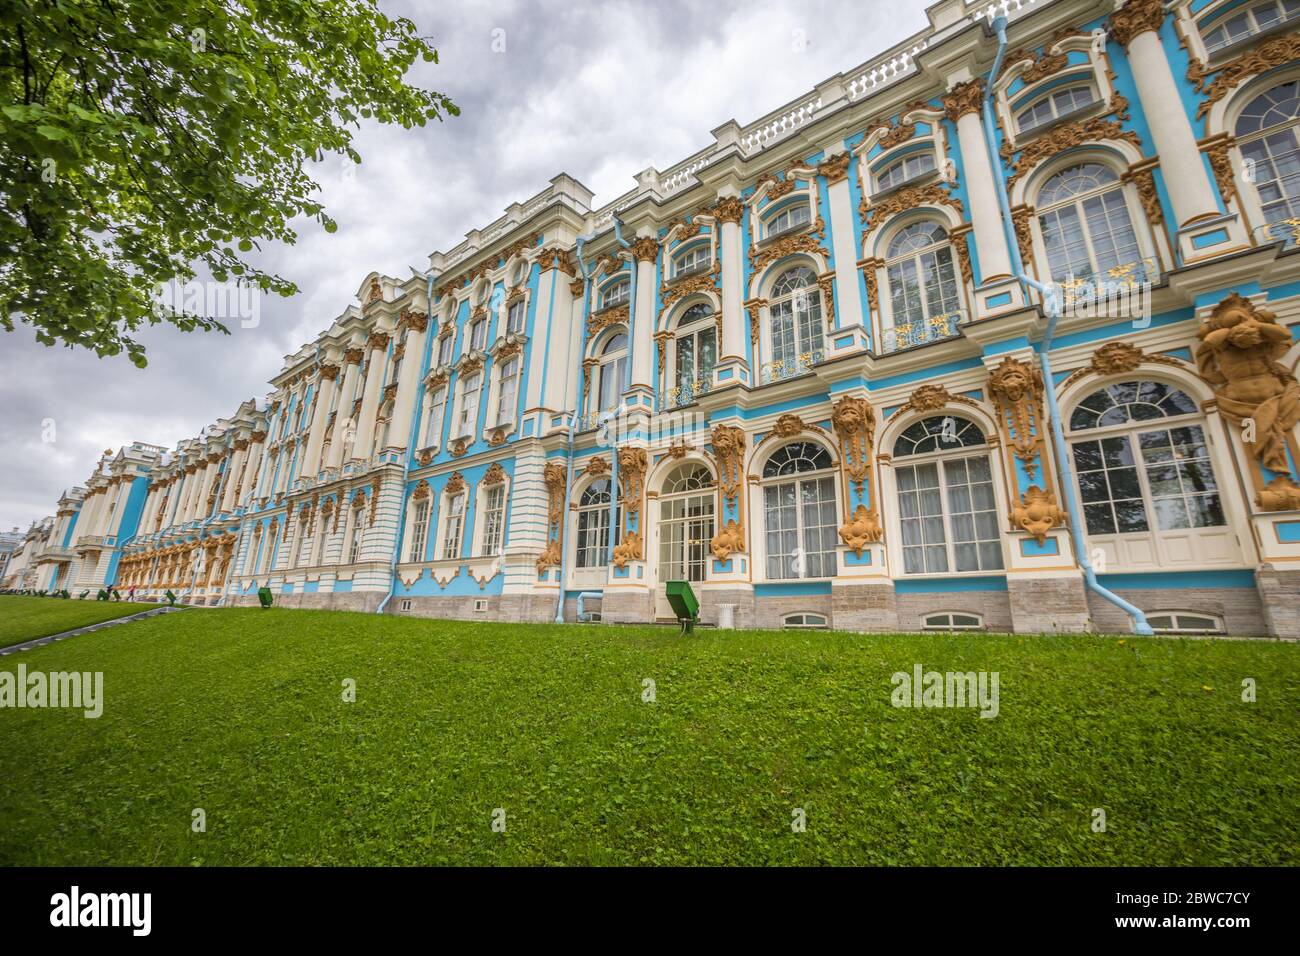 Facade of Catherine Palace in Saint Petersburg Stock Photo